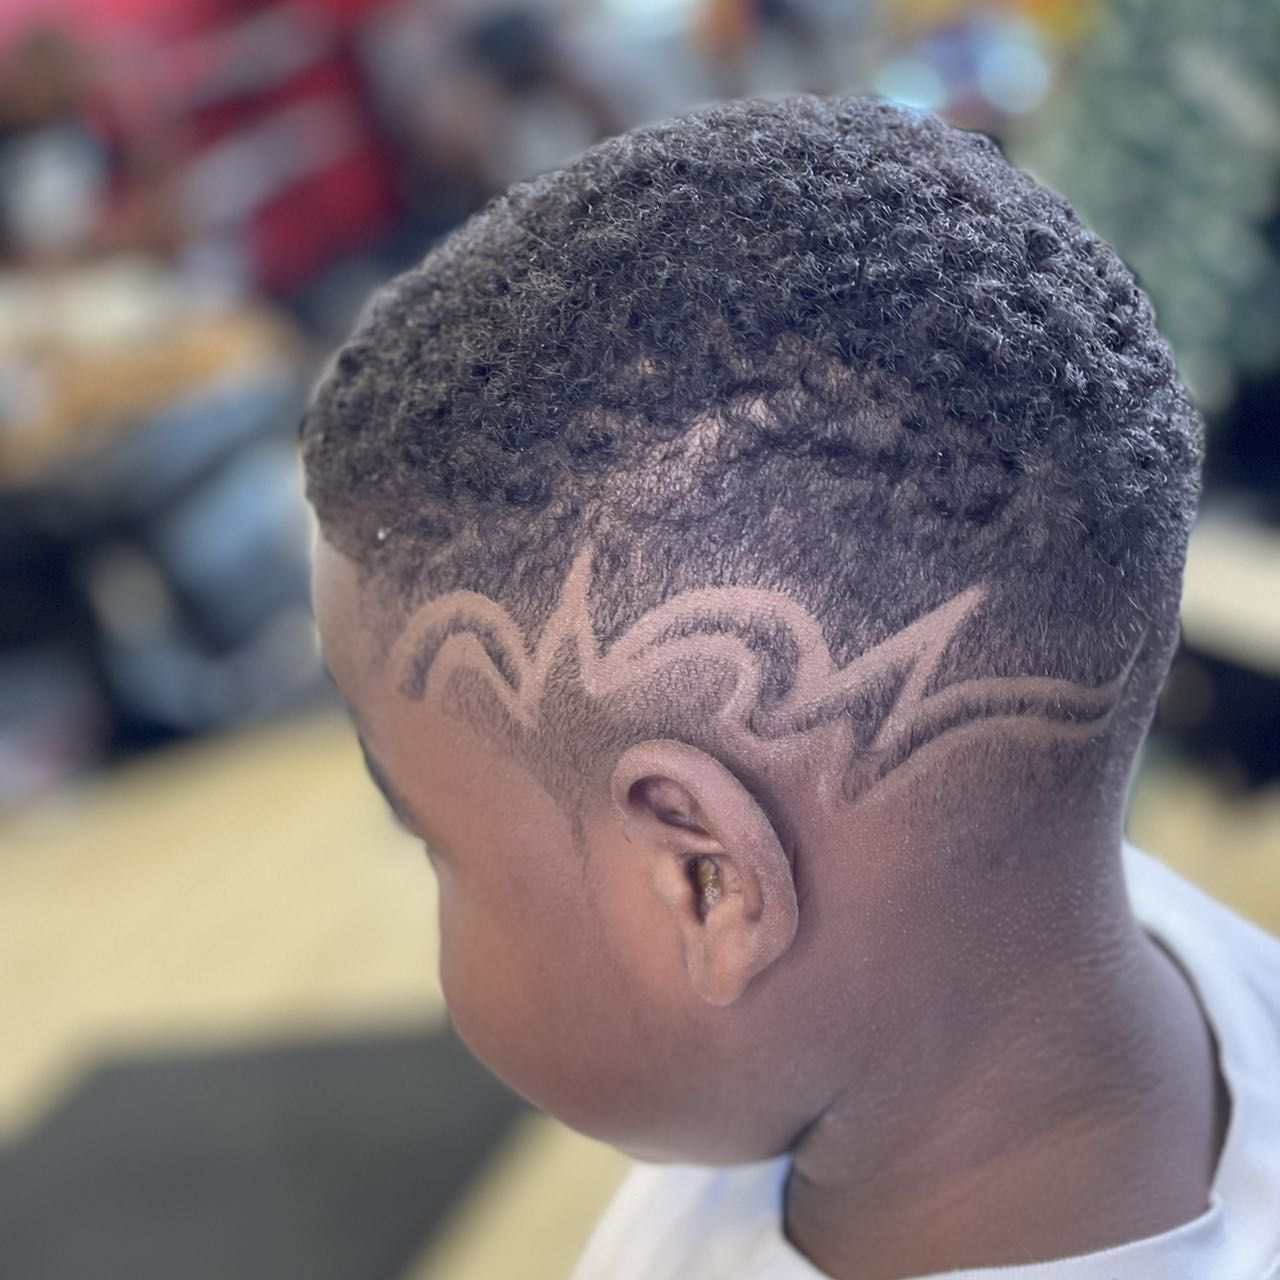 Young Mens haircut W/design (2 - 17) years old portfolio